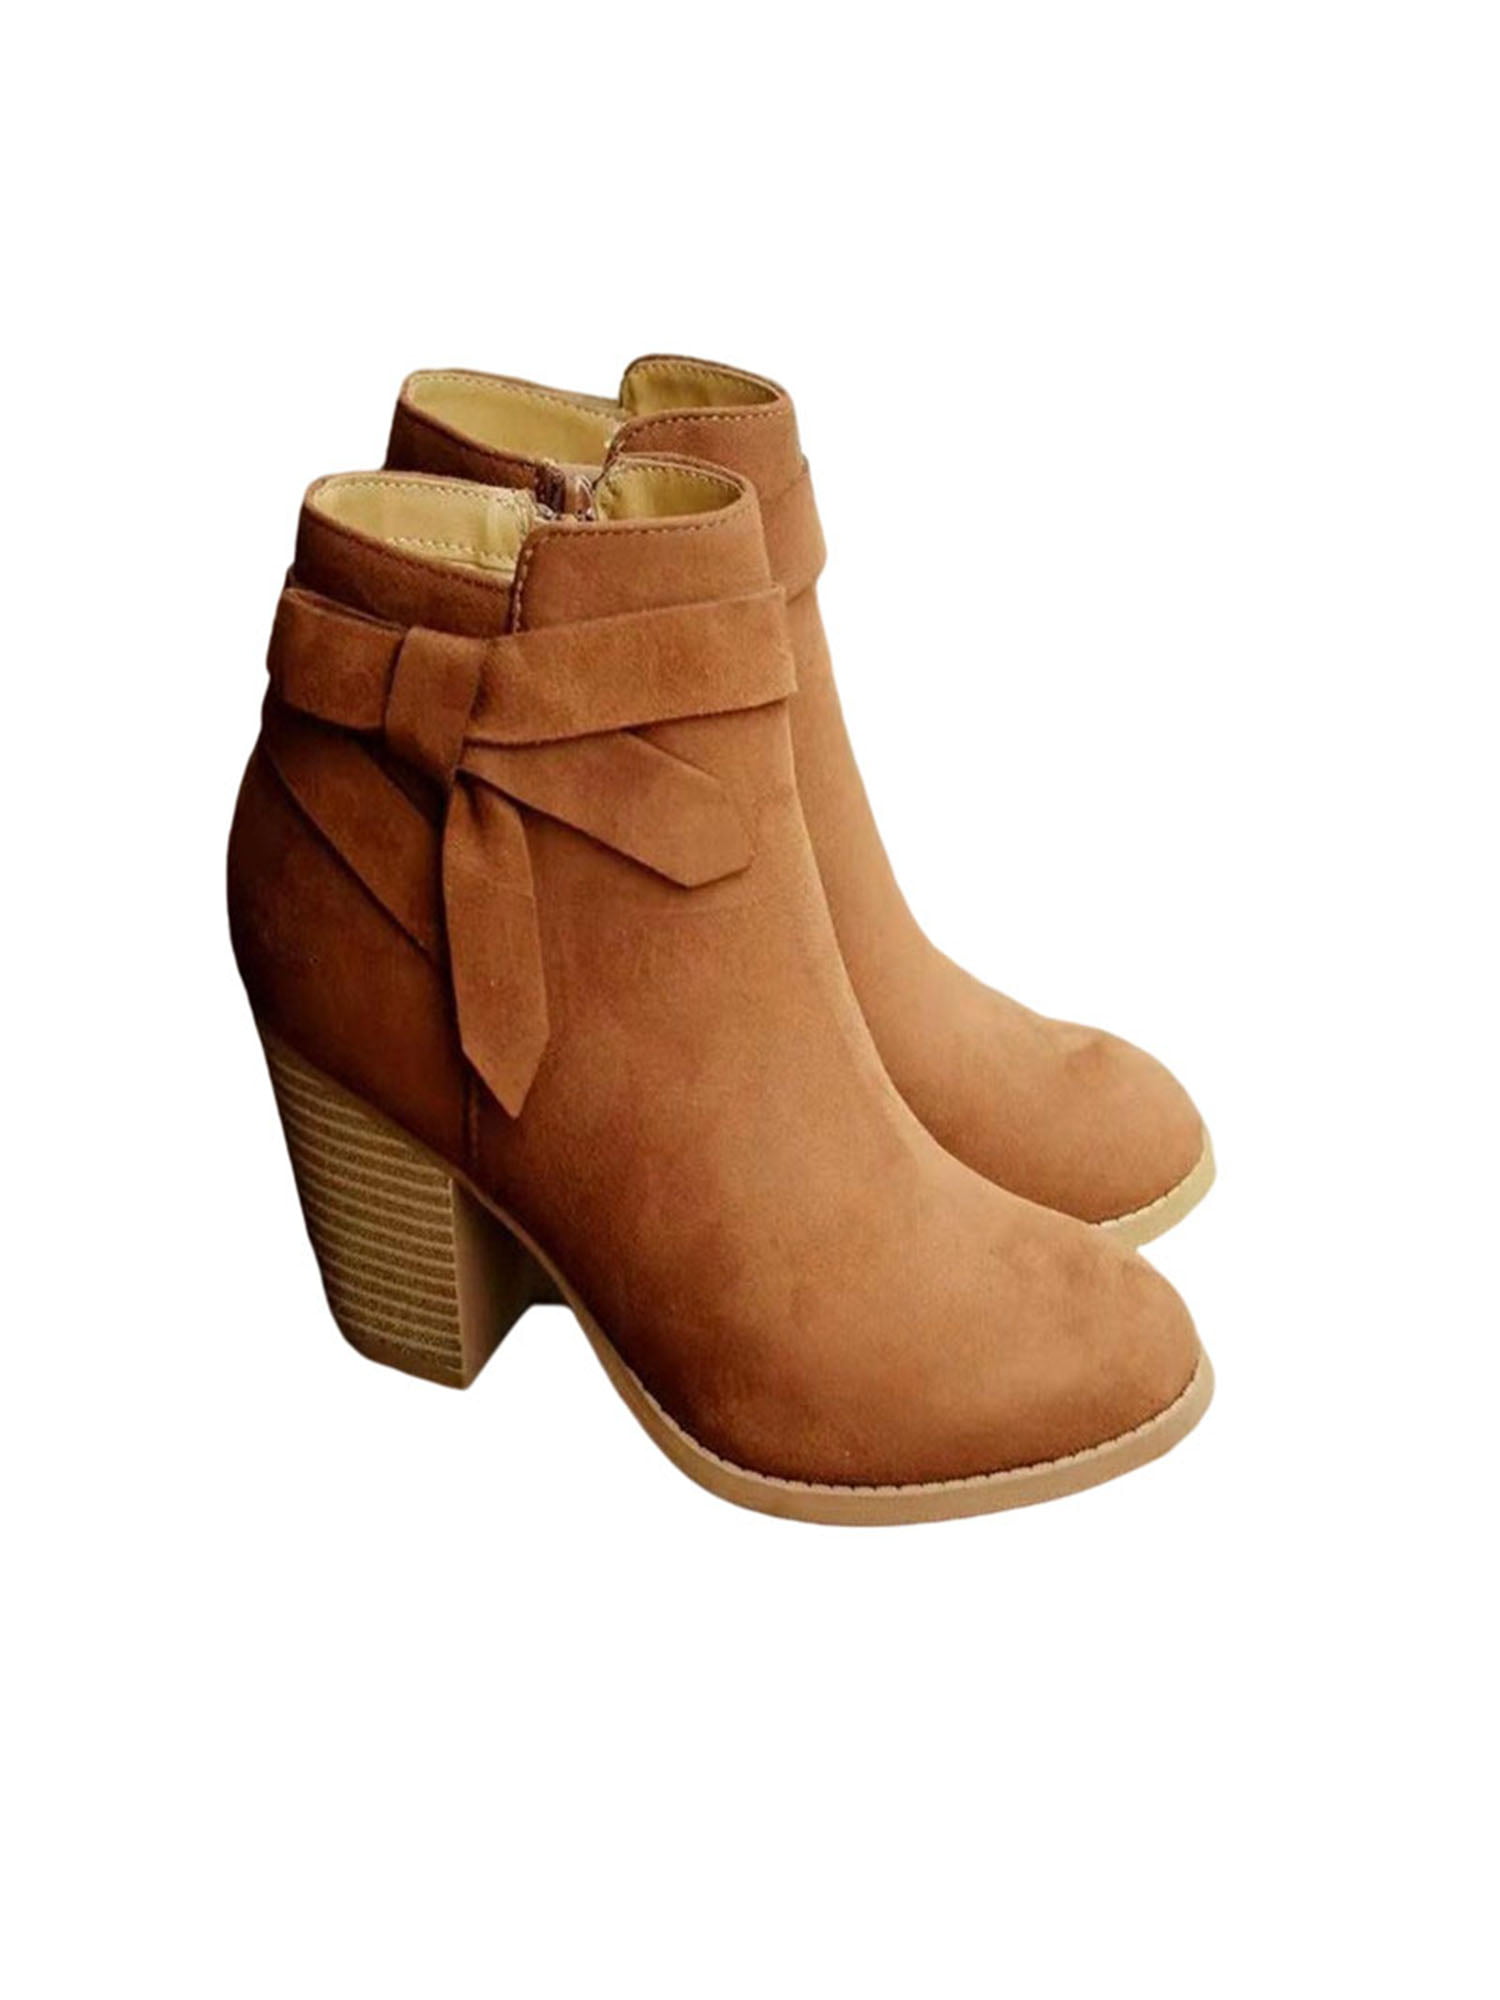 Womens Casual Suede Ankle Boots Mid Chunky Heel Pointed Toe Metal Studded Zipper Short Booties 